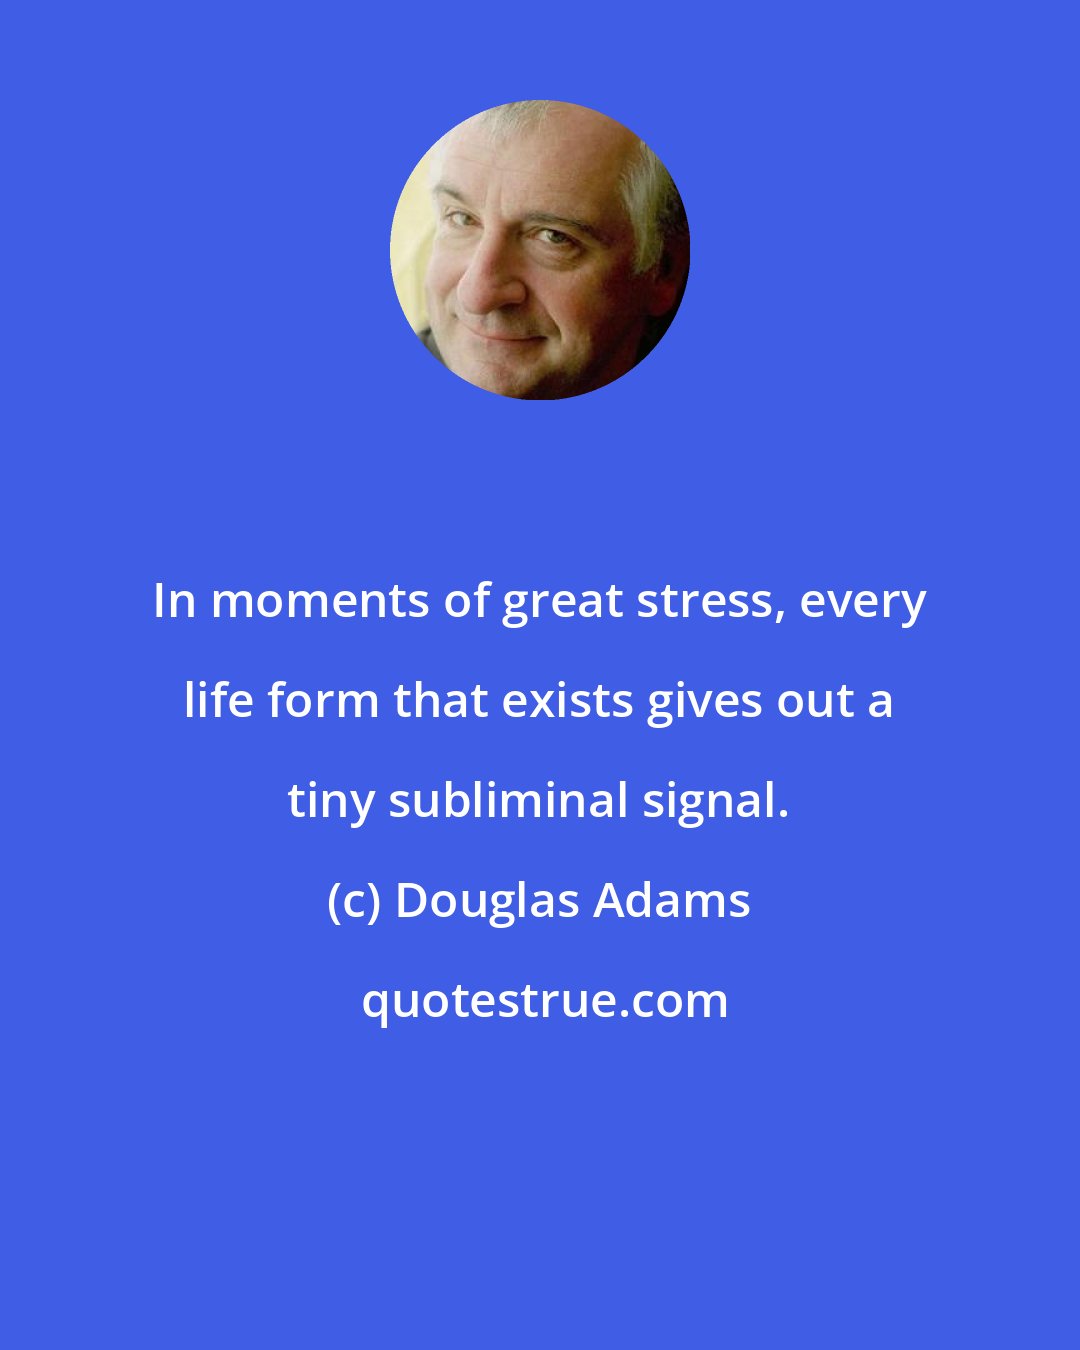 Douglas Adams: In moments of great stress, every life form that exists gives out a tiny subliminal signal.